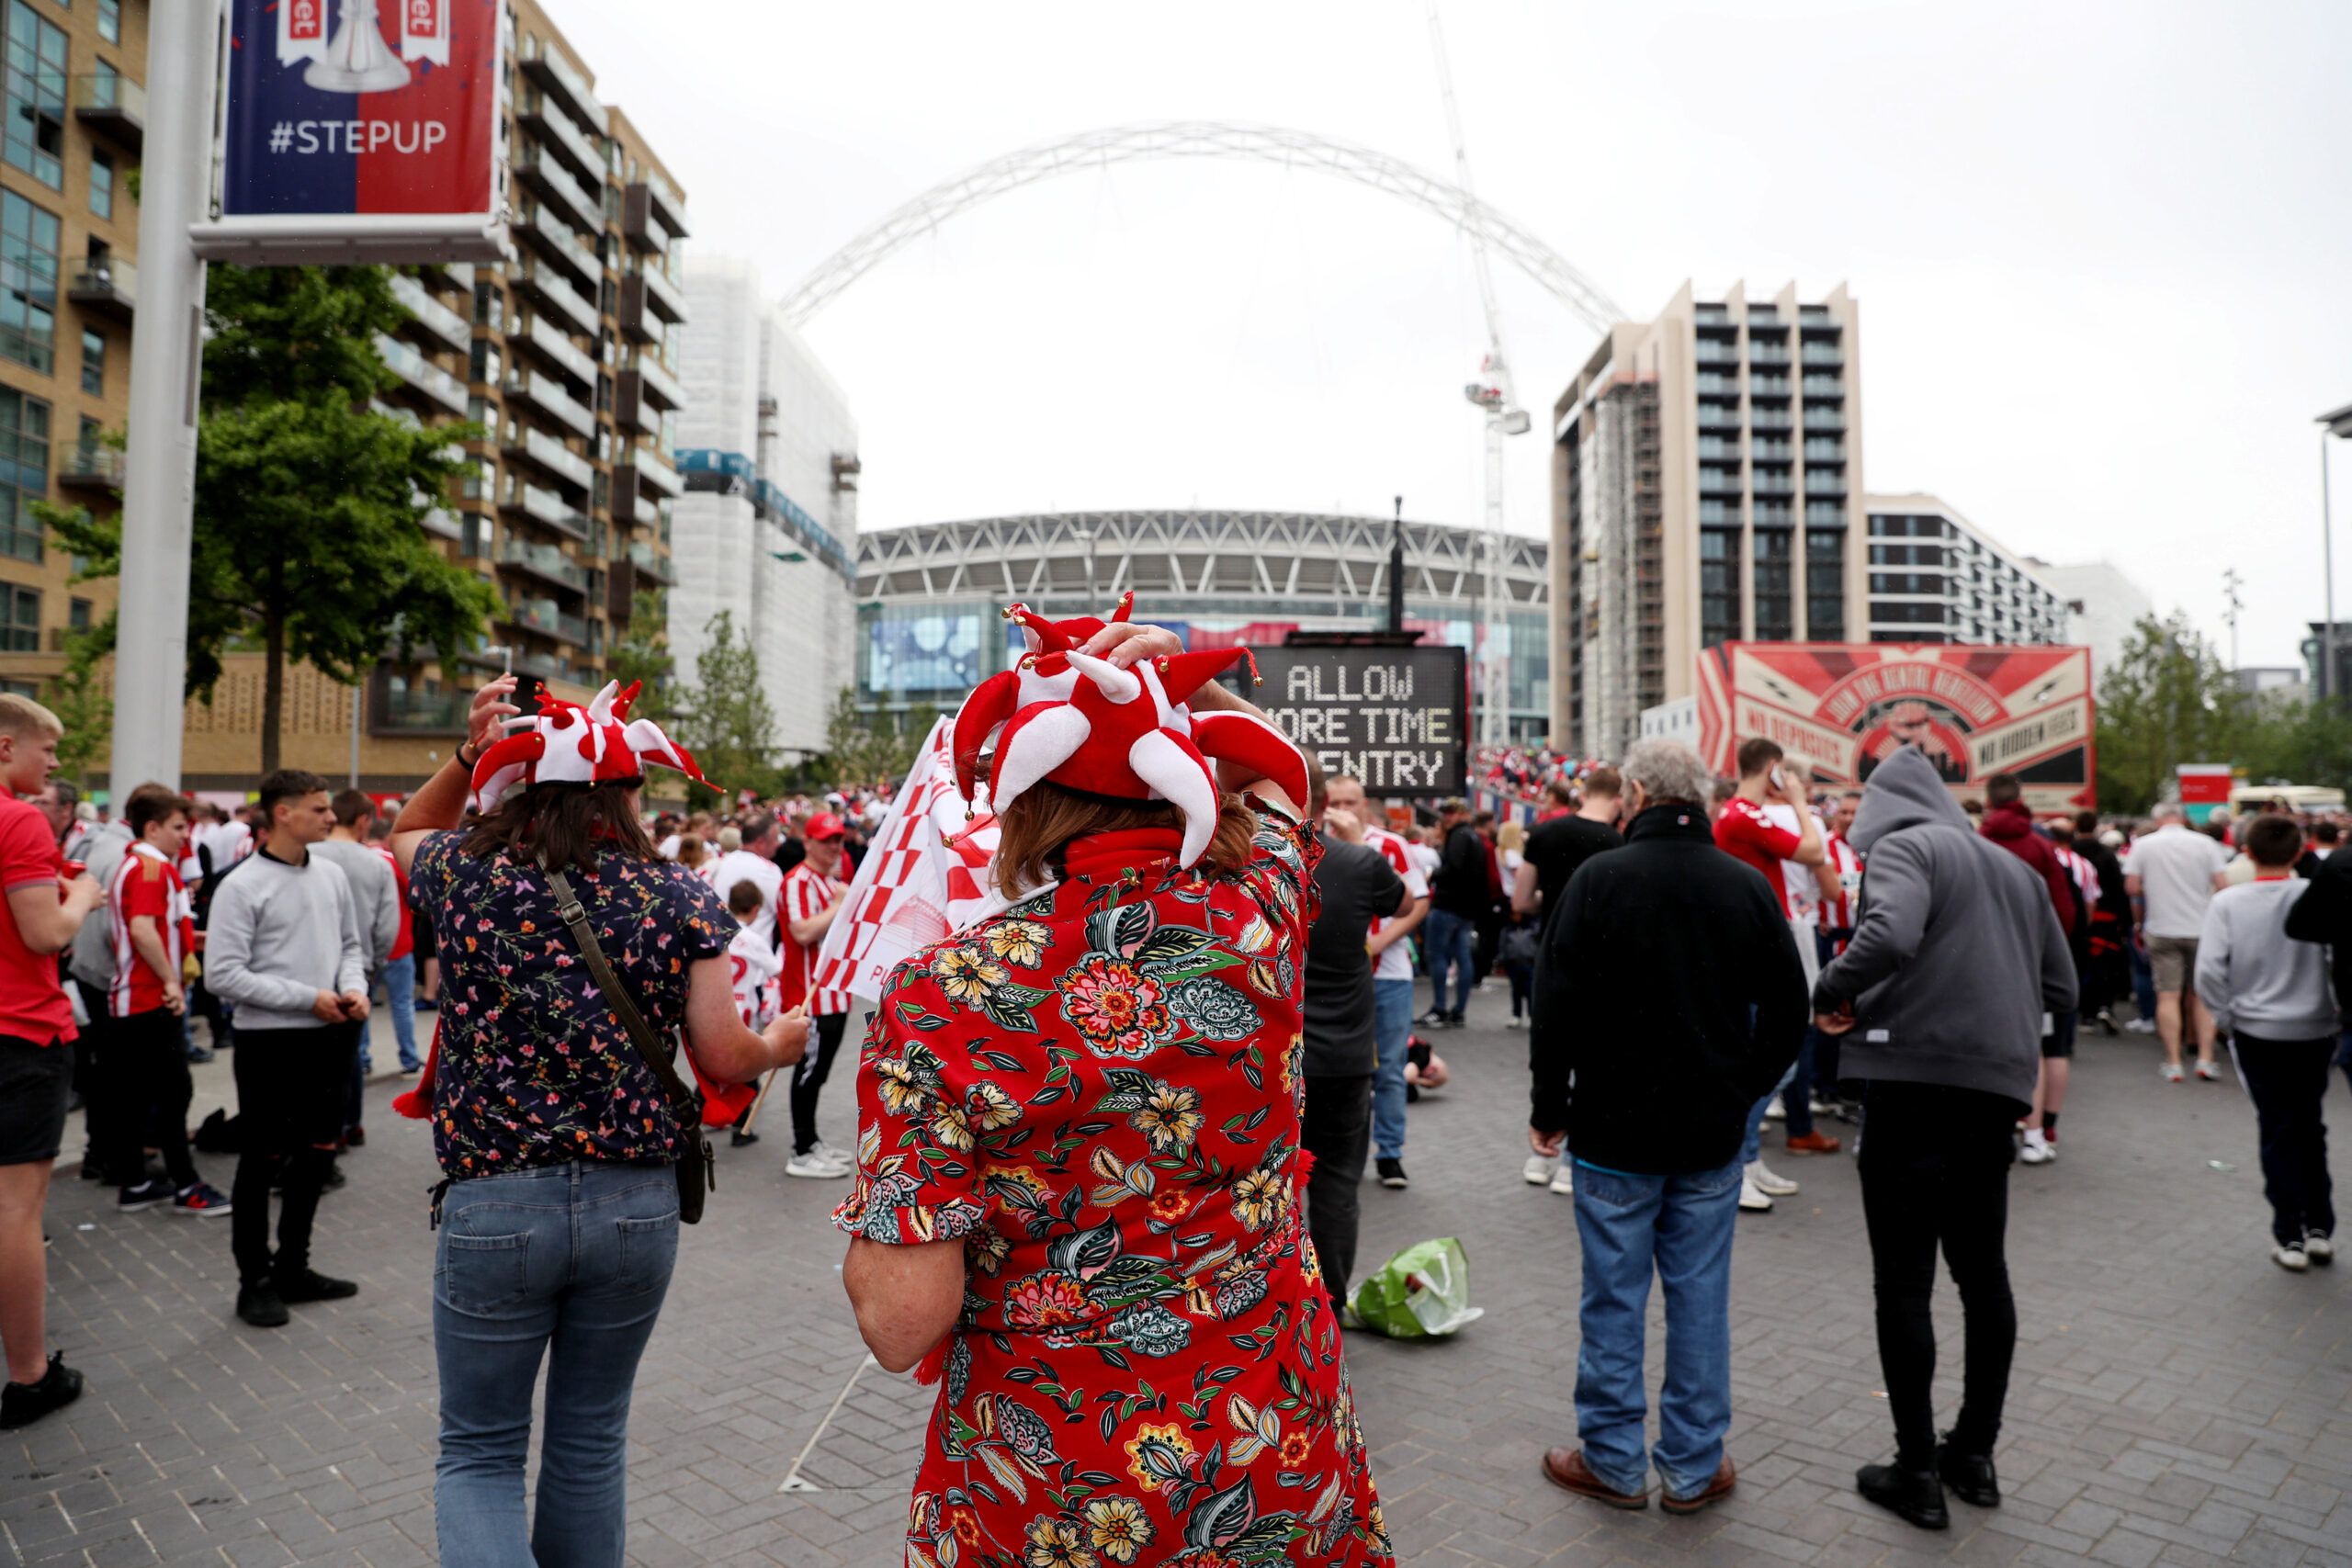 Soccer Football - League One Playoff Final - Sunderland v Charlton Athletic - Wembley Stadium, London, Britain - May 26, 2019  Sunderland fans outside the stadium before the match   Action Images/Lee Smith  EDITORIAL USE ONLY. No use with unauthorized audio, video, data, fixture lists, club/league logos or 